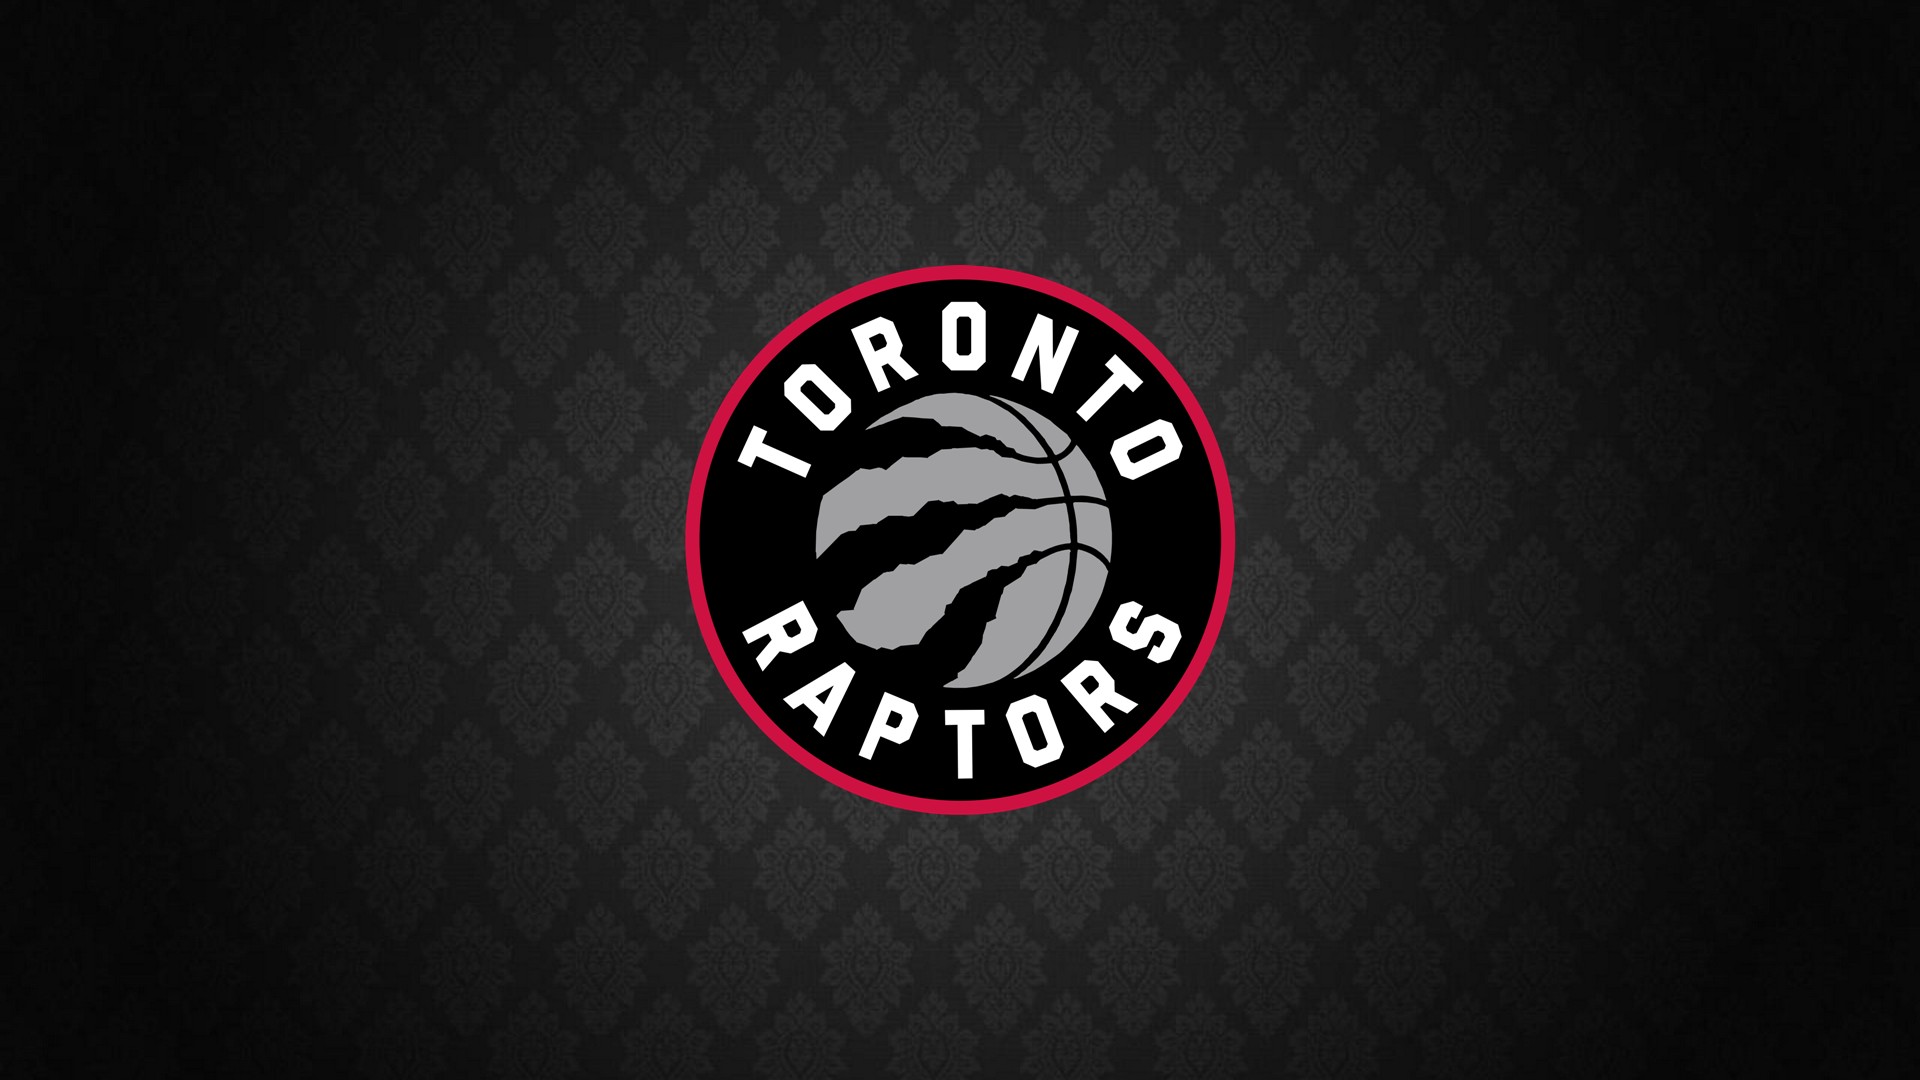 NBA Raptors Desktop Wallpaper with image dimensions 1920x1080 pixel. You can make this wallpaper for your Desktop Computer Backgrounds, Windows or Mac Screensavers, iPhone Lock screen, Tablet or Android and another Mobile Phone device